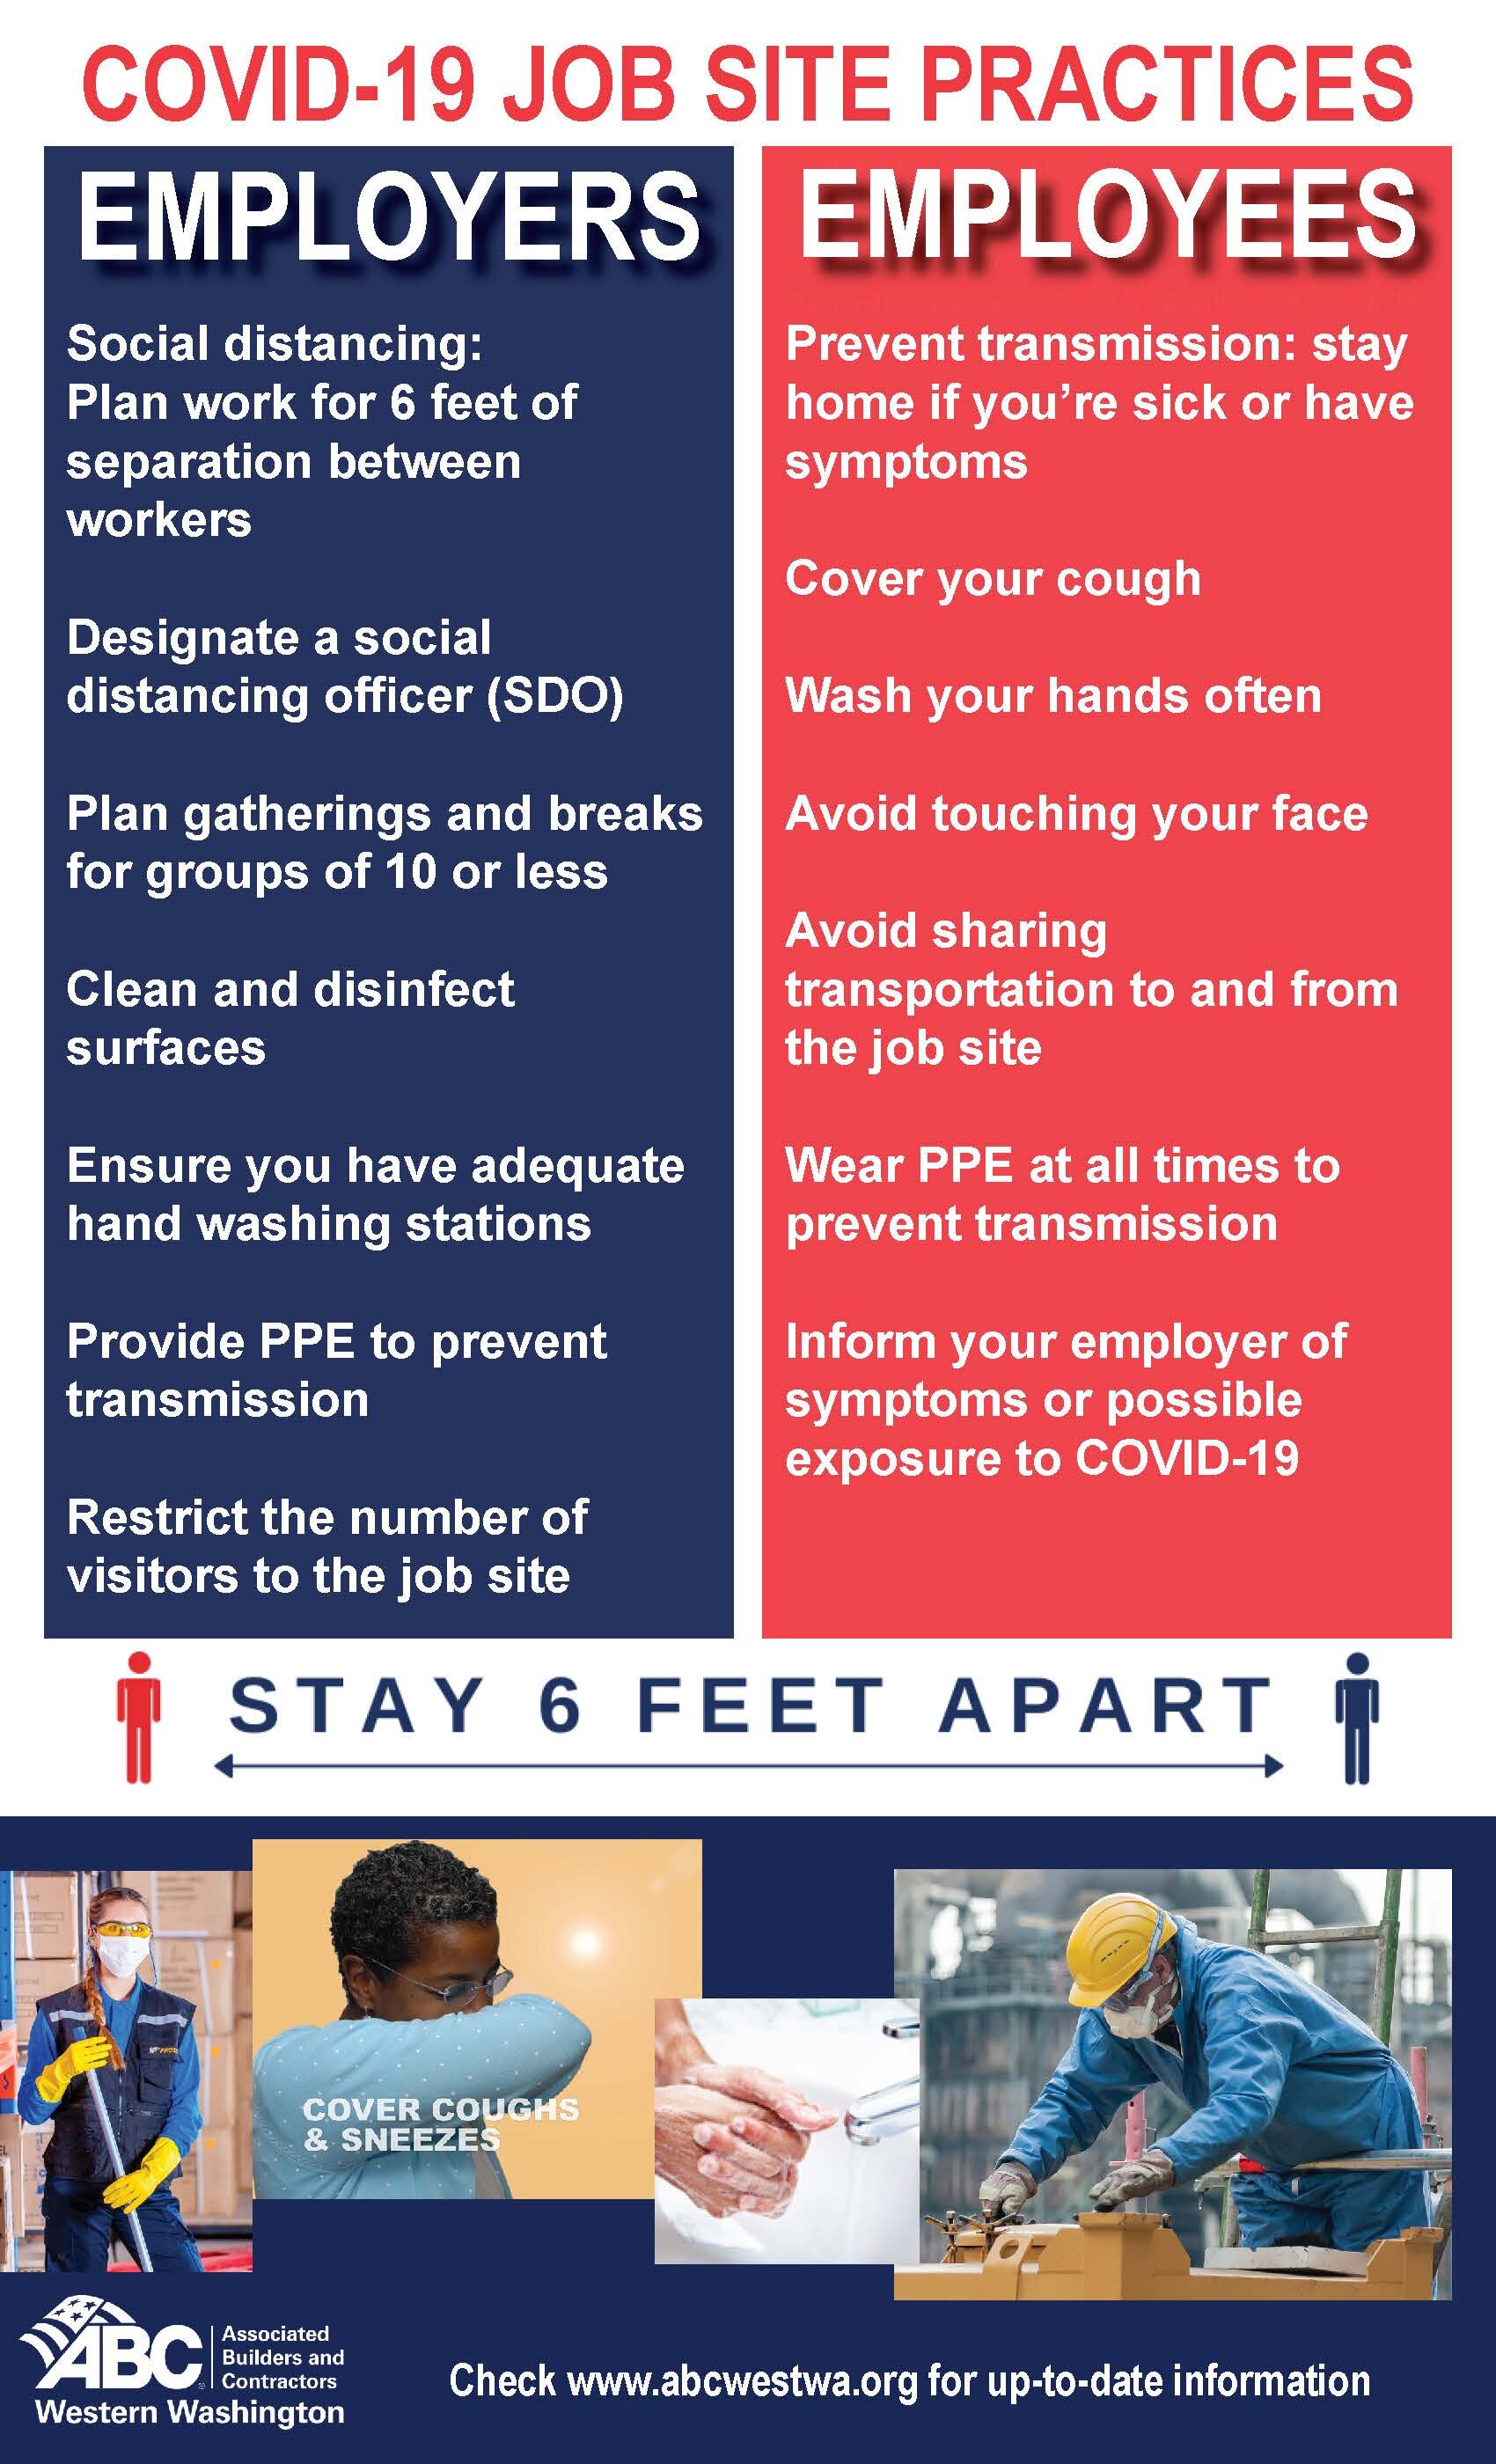 ABC COVID Safety Poster_2020.jpg